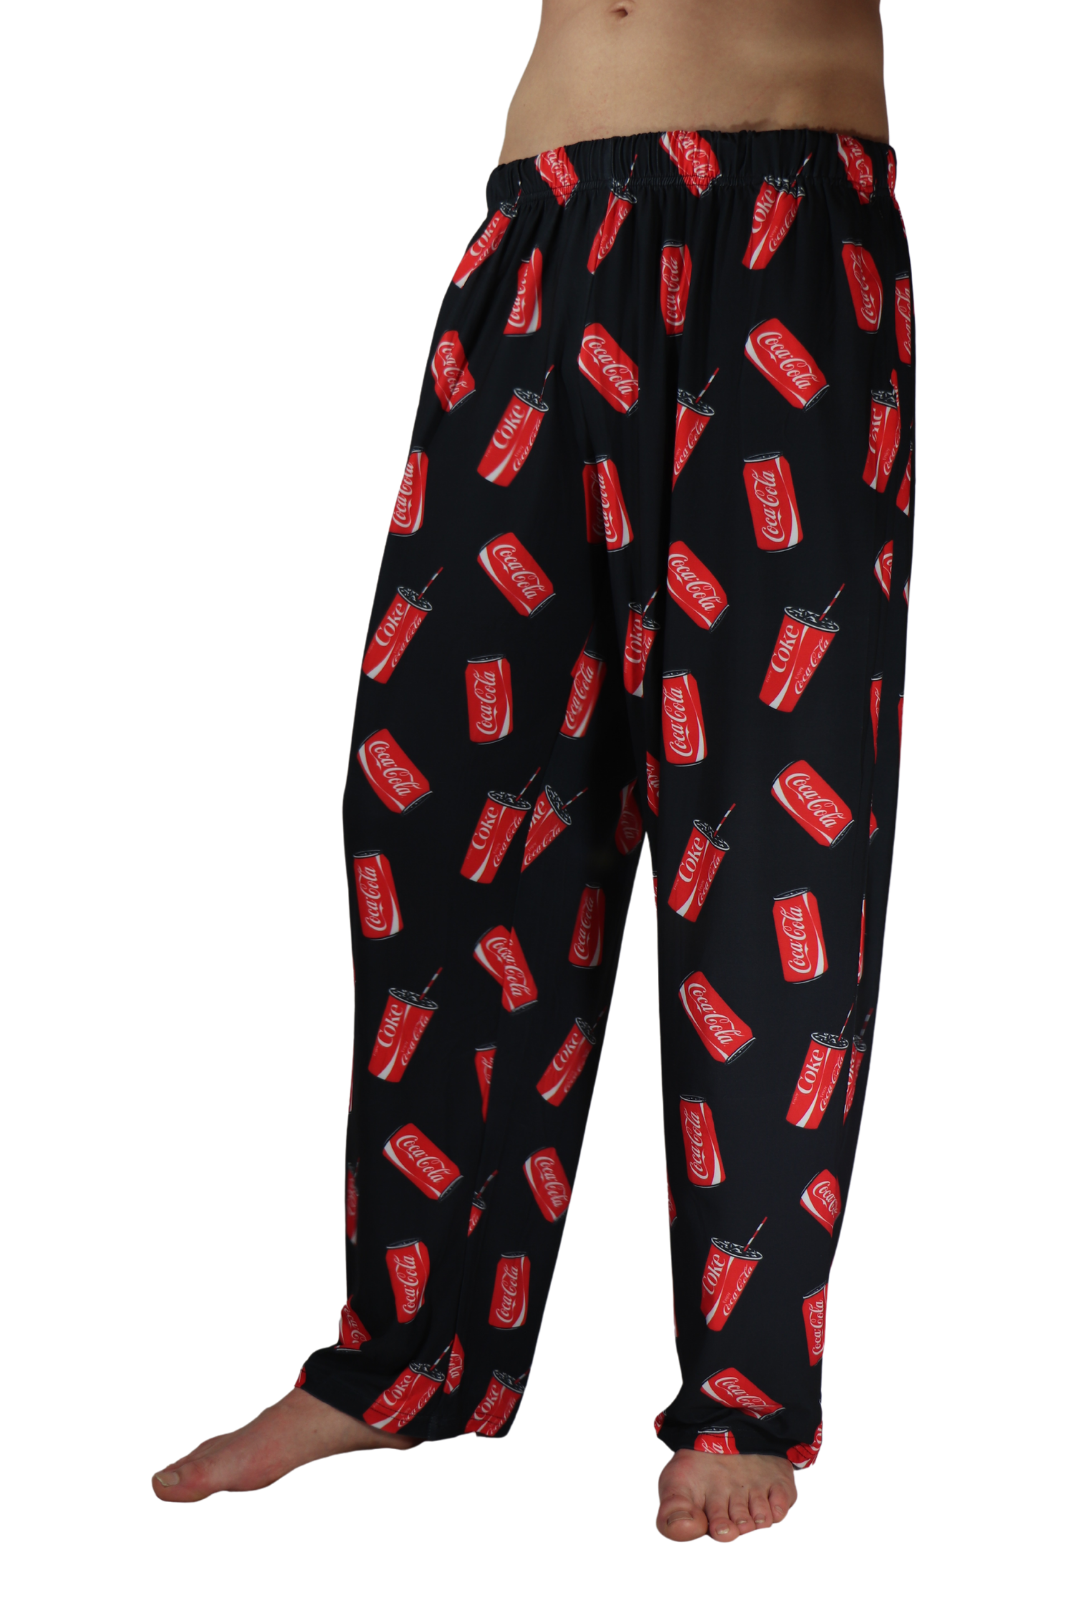 Coca-Cola Can & Cup Pattern Pajama Lounge Pants on model left side angle view